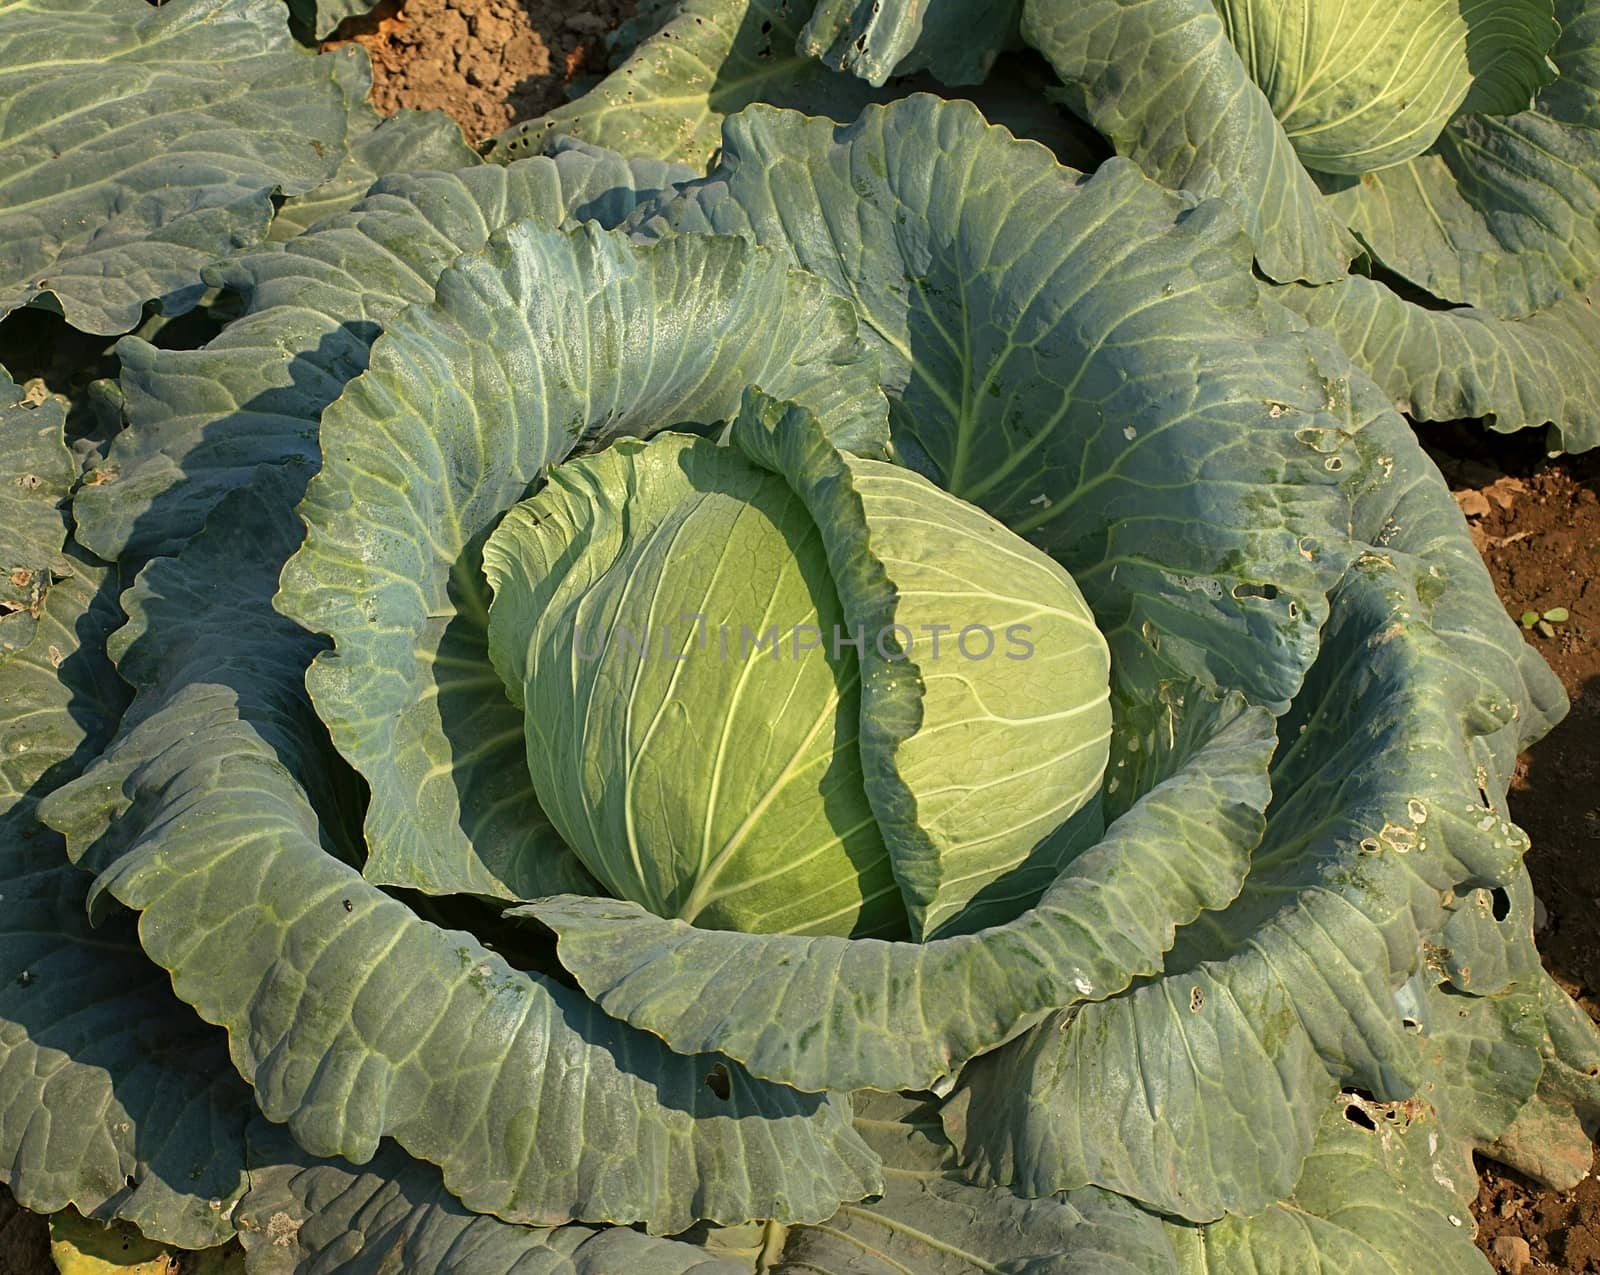 Large Cabbage Head in a Field by shiyali